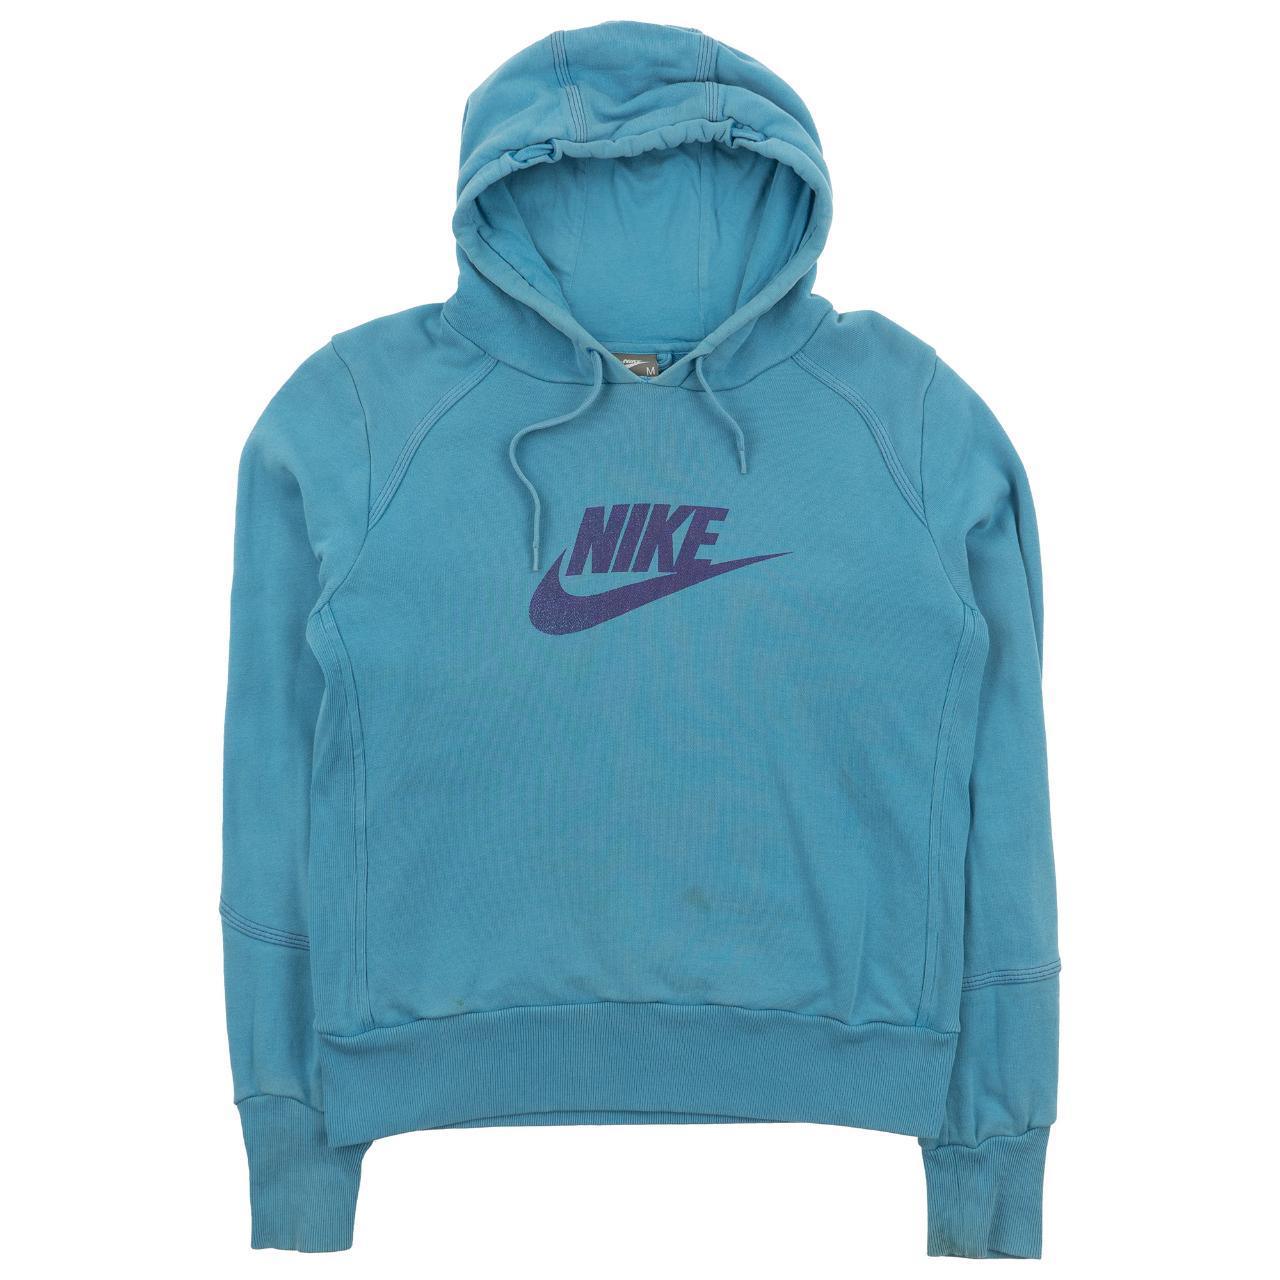 Vintage Nike Hoodie woman’s Size S - Known Source